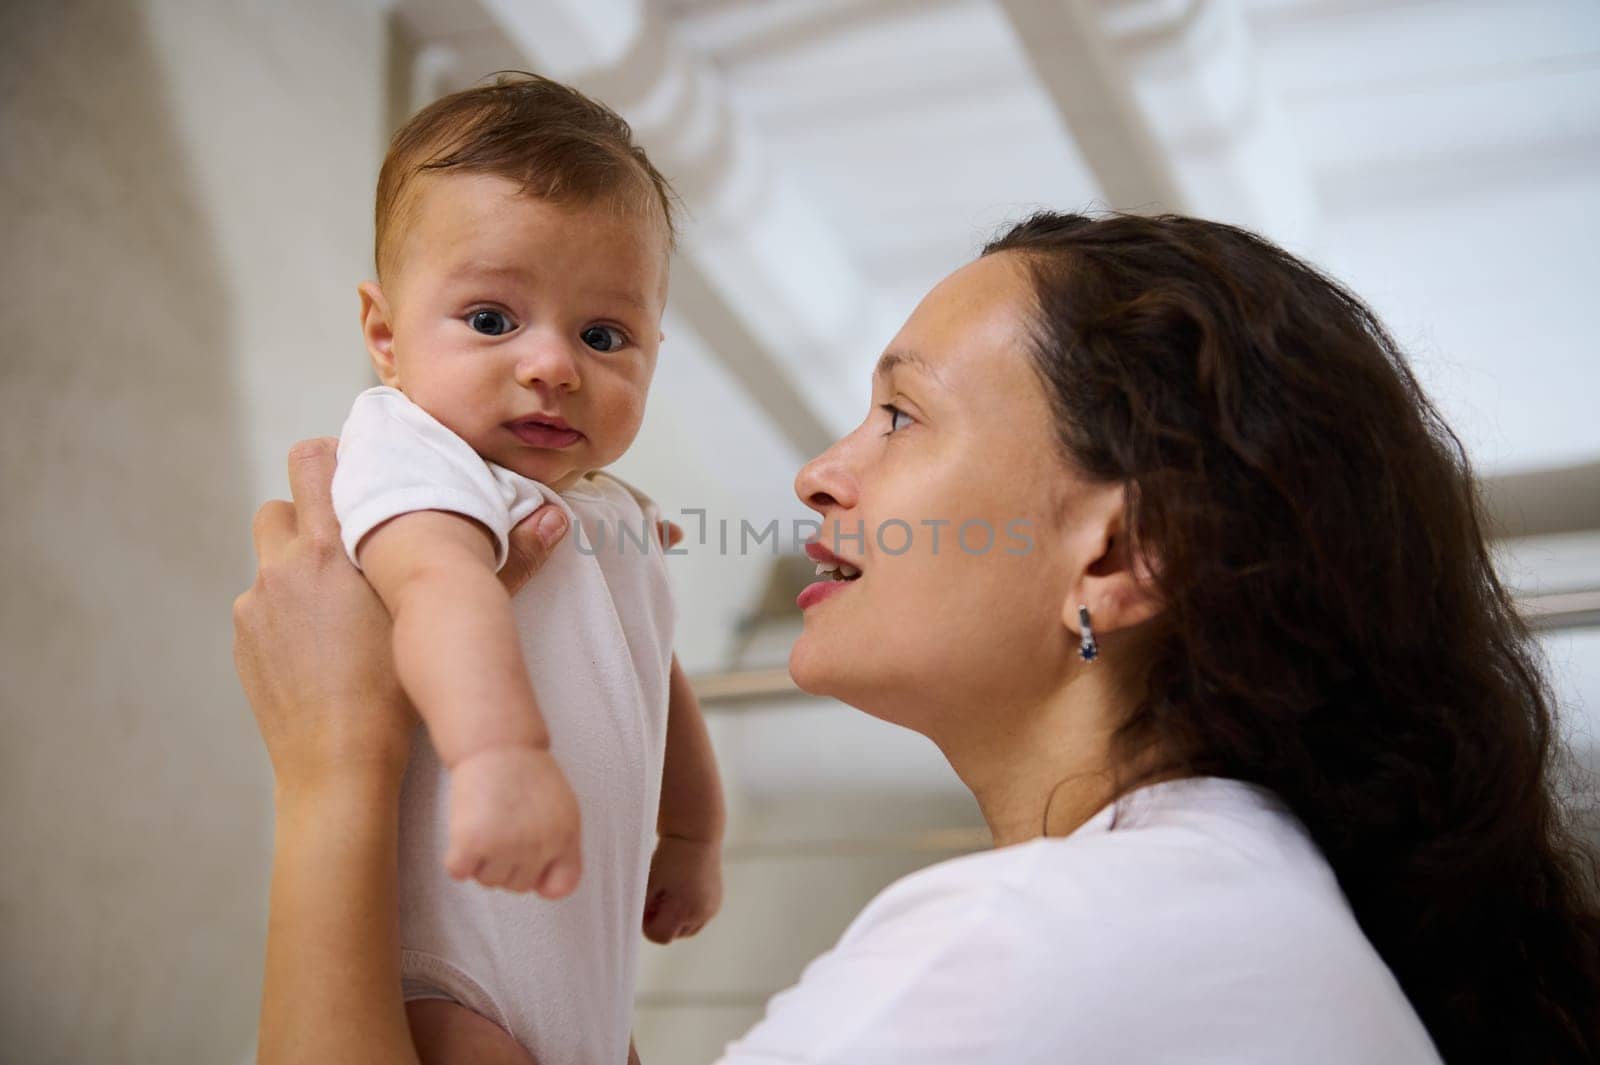 Side view of a happy smiling woman mother holding her baby boy in her arms. Close-up portrait by artgf